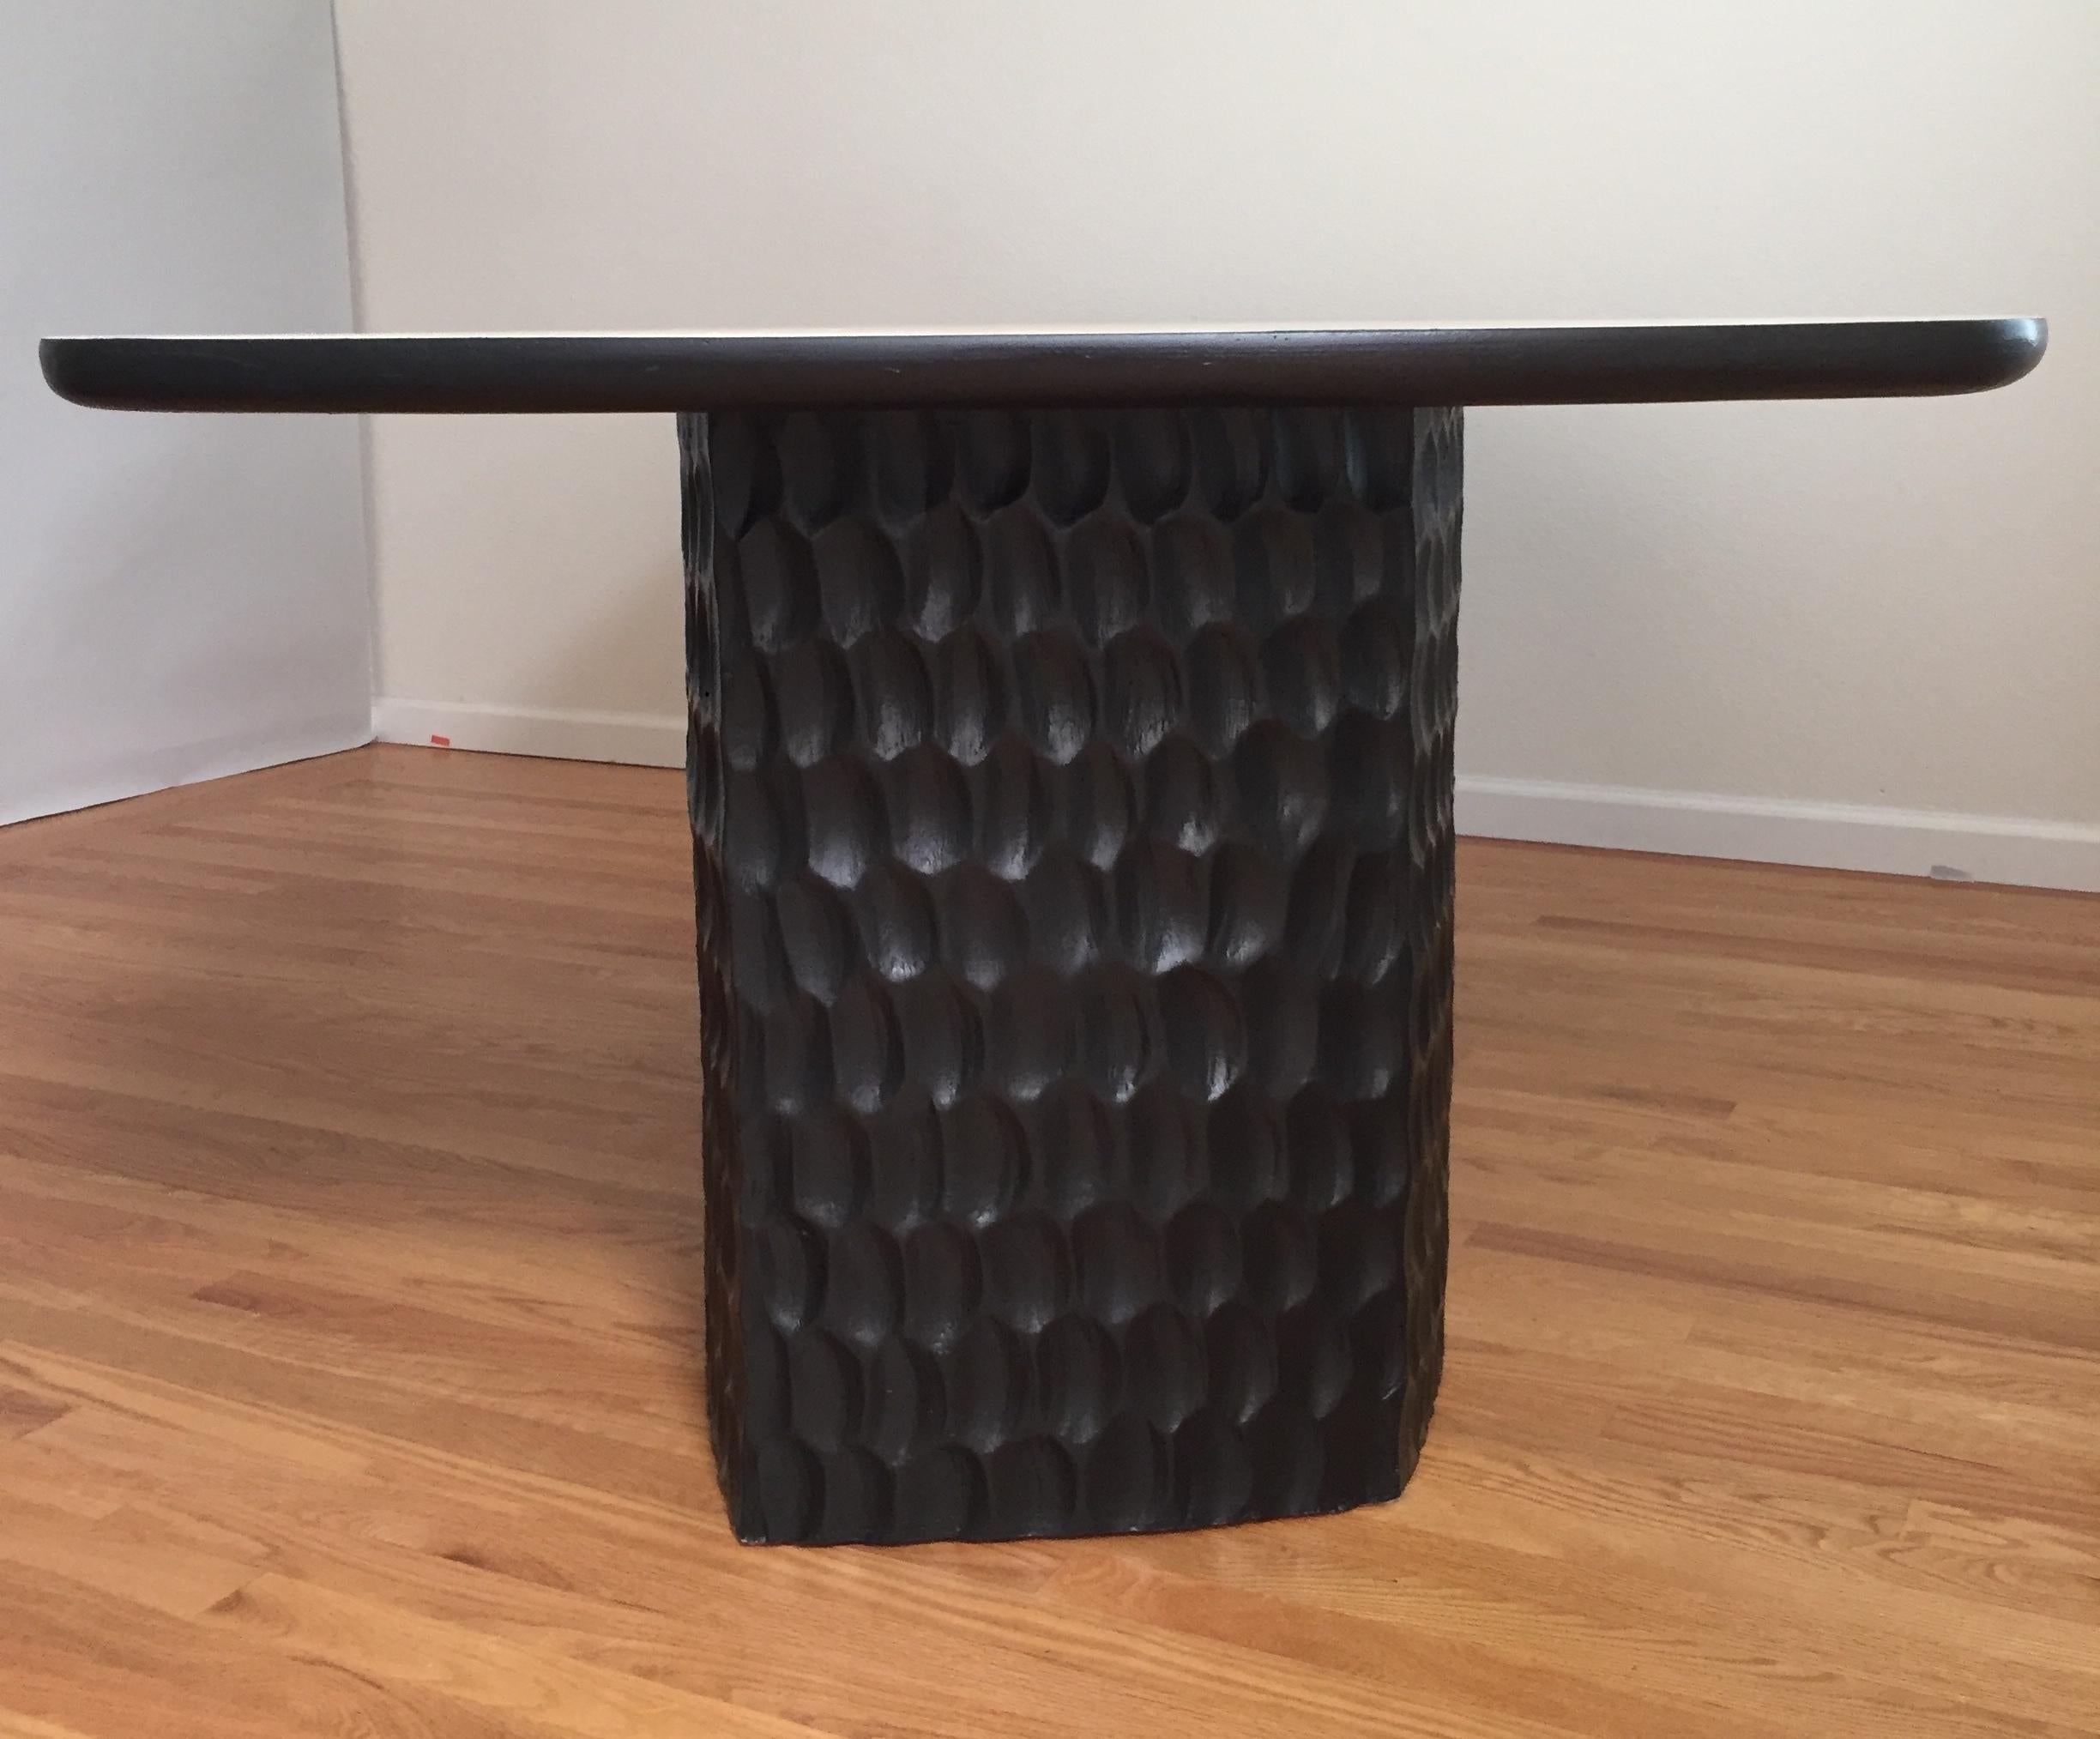 Sculptural Muir Dining Table White Ash Veneer Top and Carved Black Wood Base In Excellent Condition For Sale In Daly City, CA